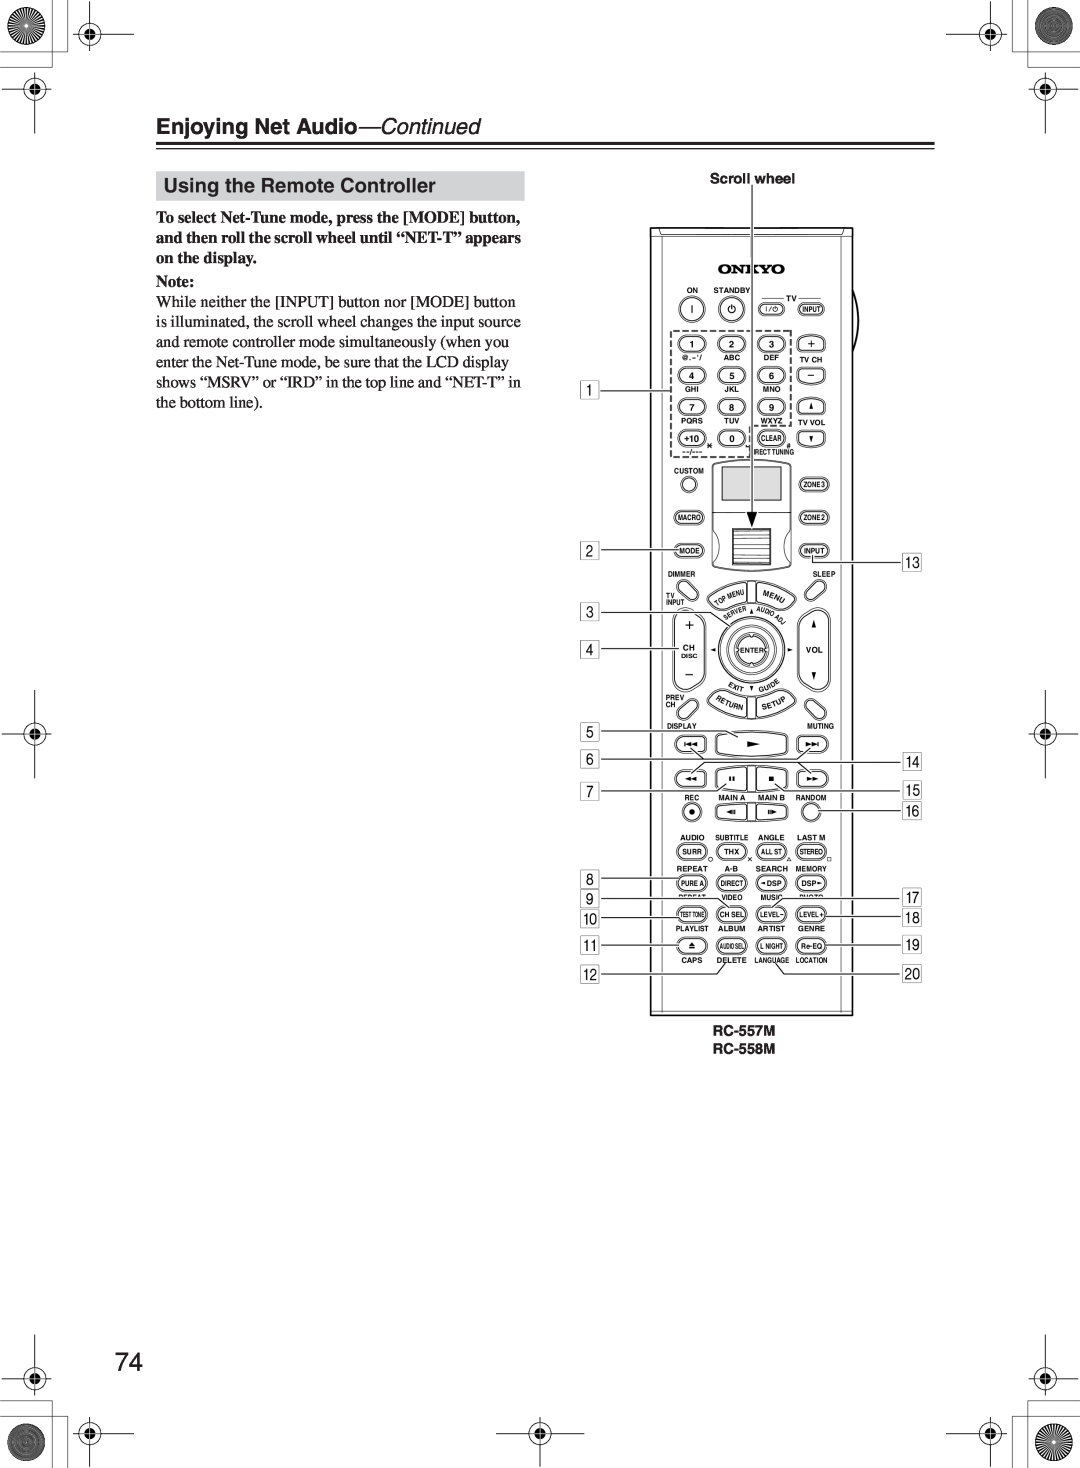 Onkyo TX-NR1000 instruction manual Enjoying Net Audio—Continued, Using the Remote Controller 